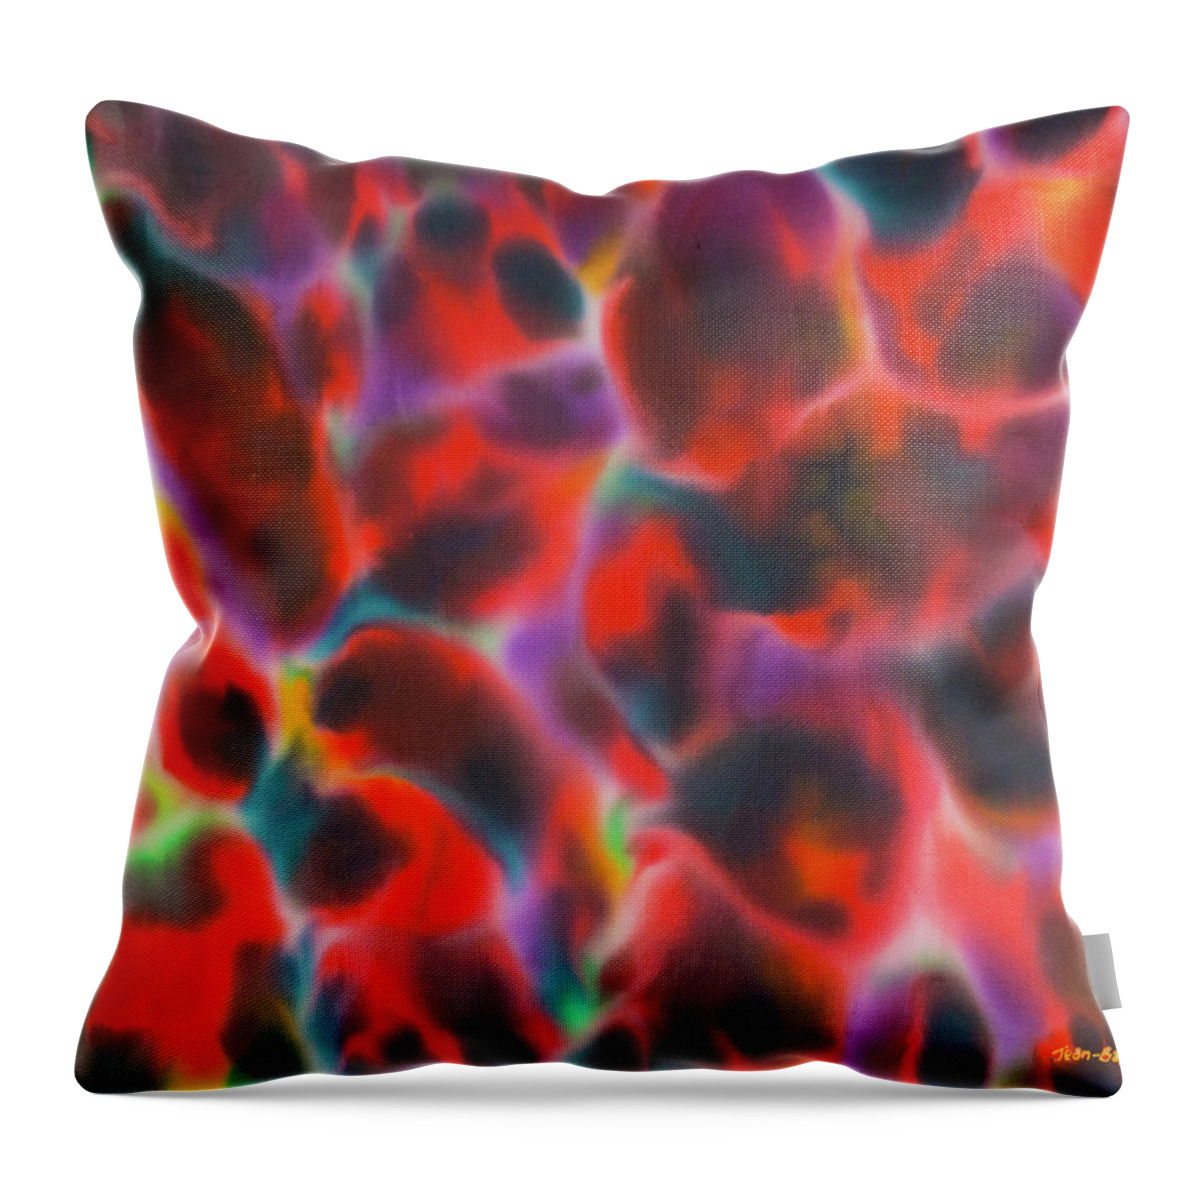 Opal Throw Pillow featuring the painting Red Opal by Daniel Jean-Baptiste